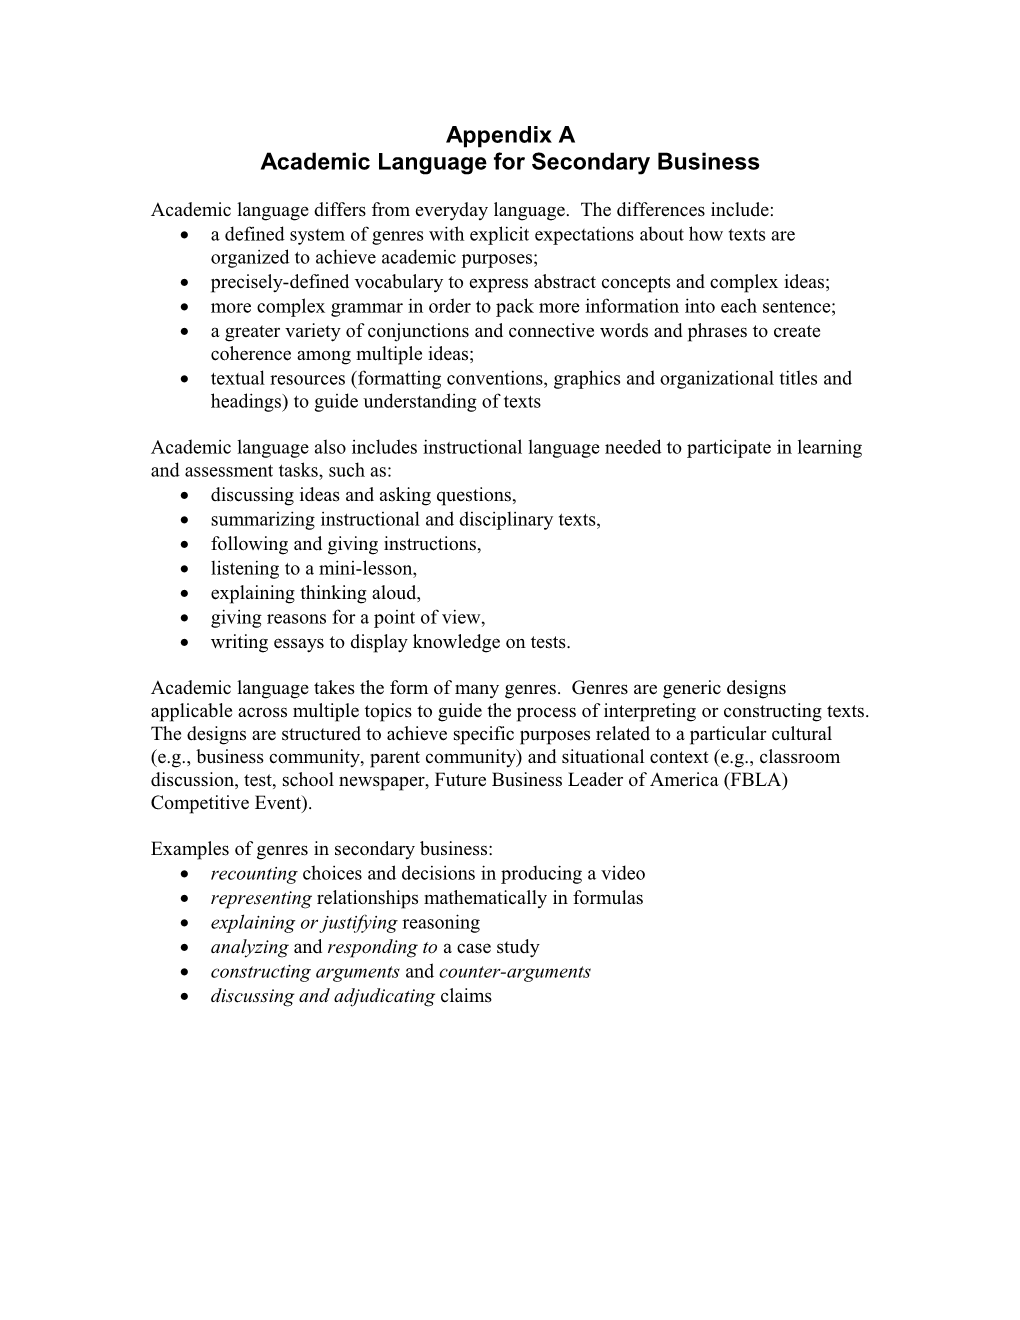 Academic Language for Secondary Business